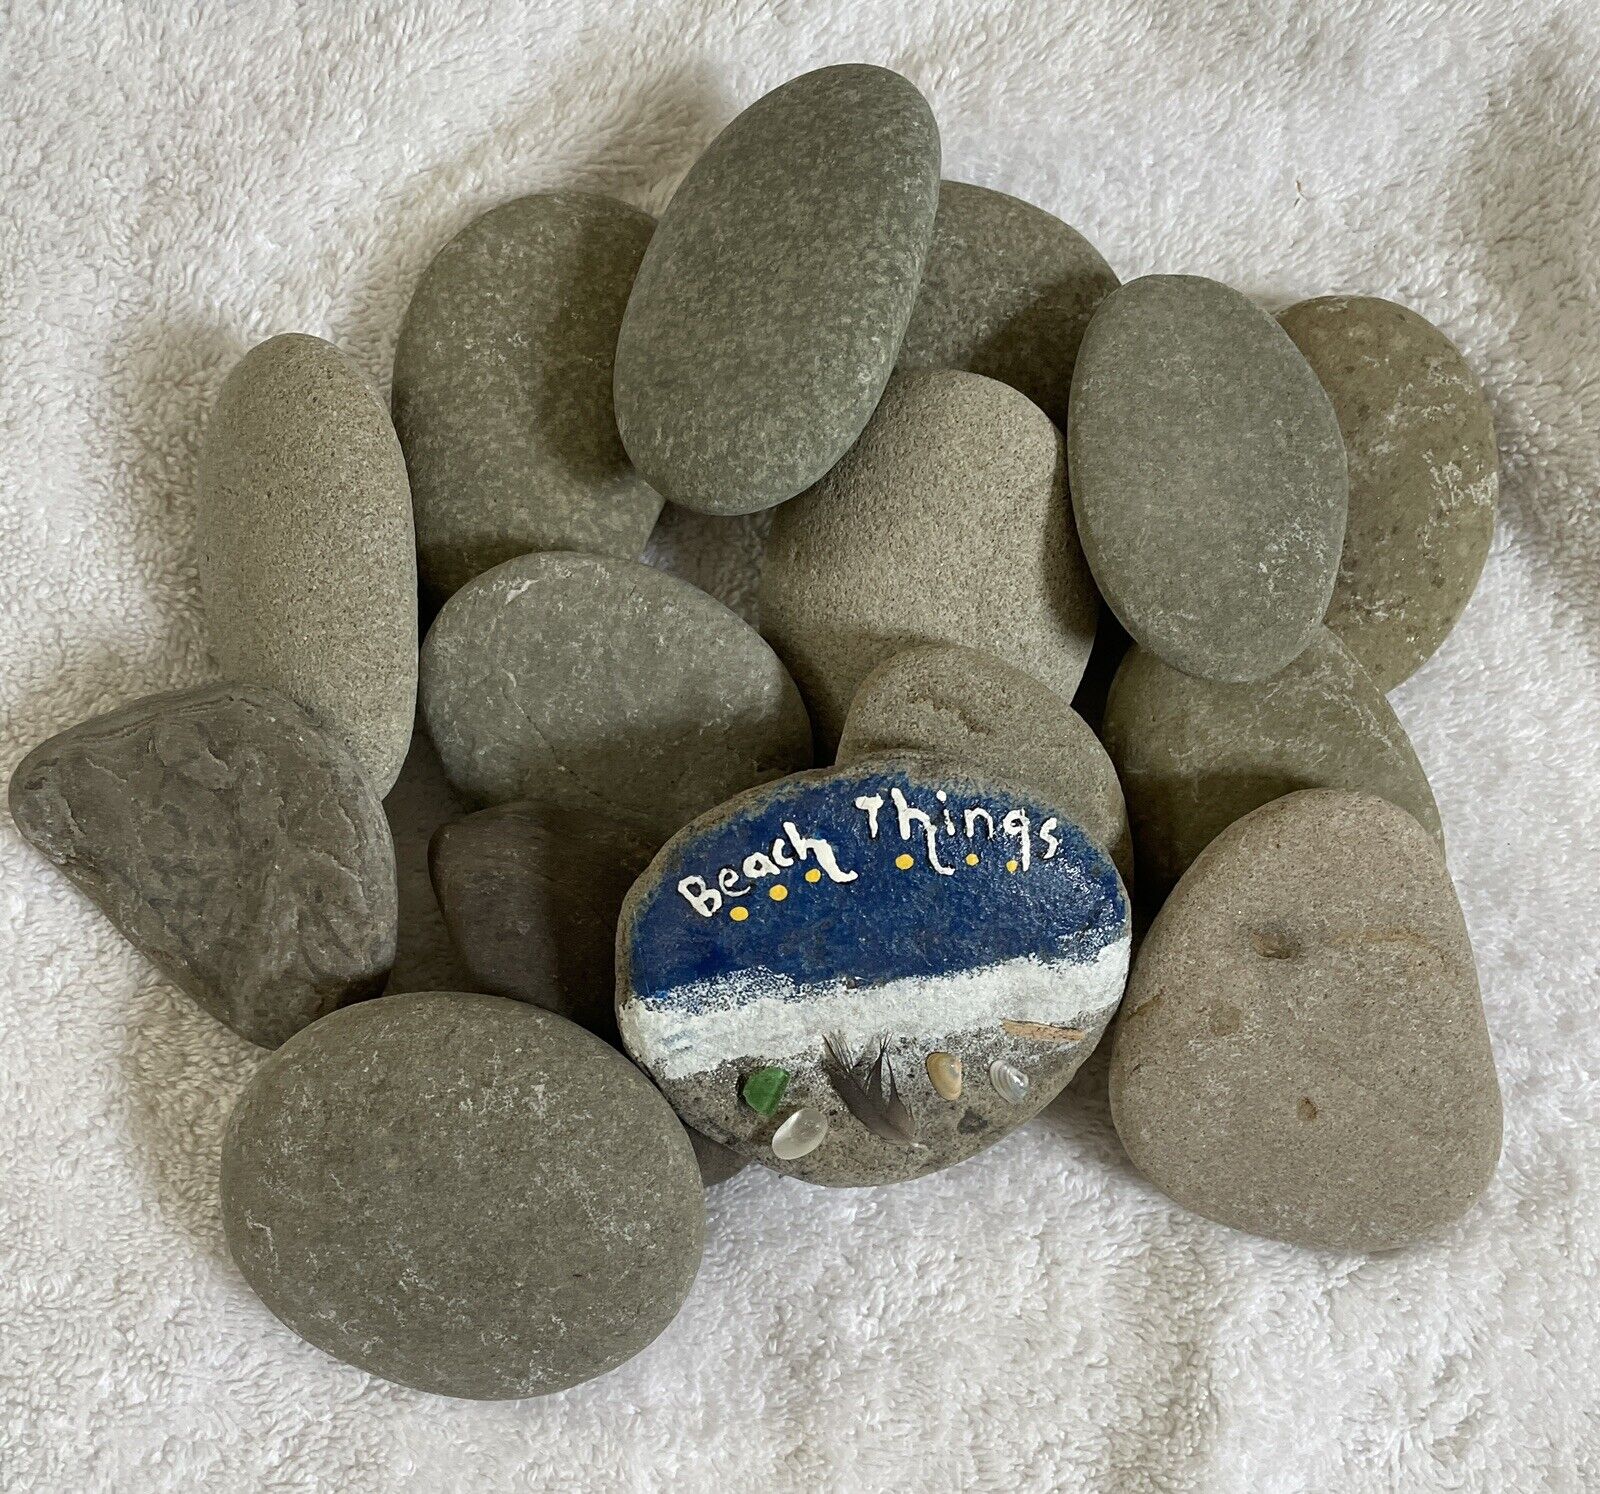 Ten (10) Medium Sized 3”- 3 1/2", Flat Smooth Beach Rocks!  Ready for Painting! Unbranded